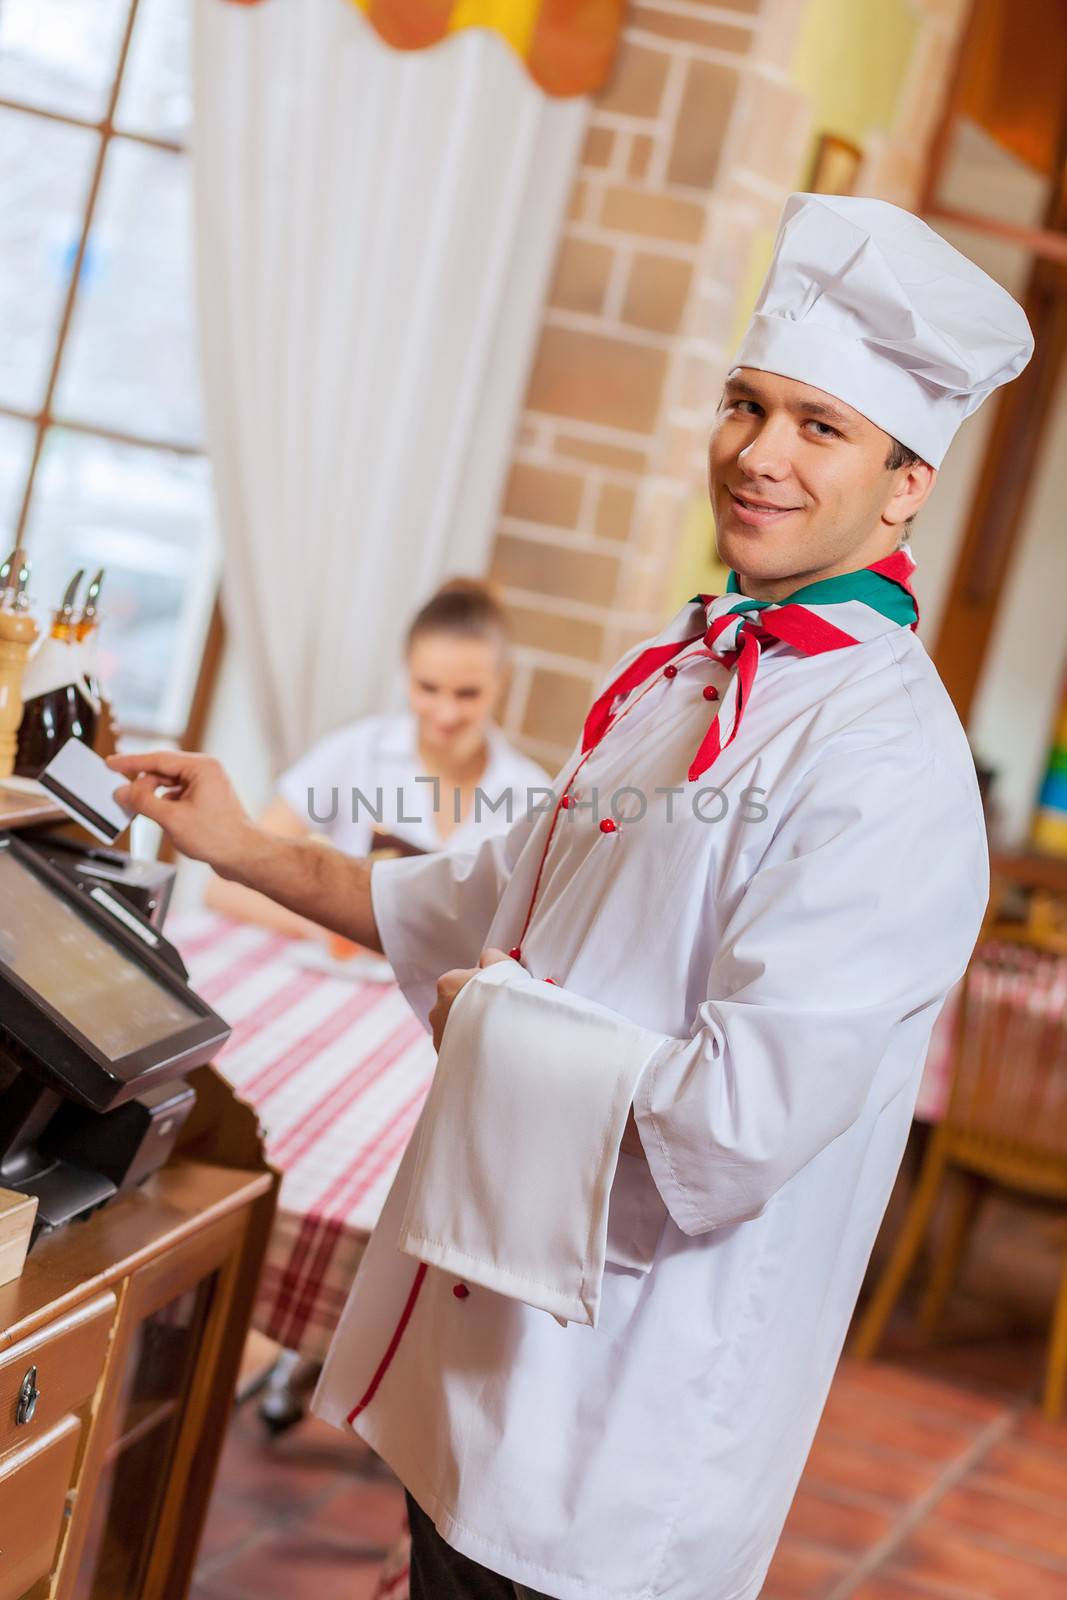 Chef at cafe by sergey_nivens